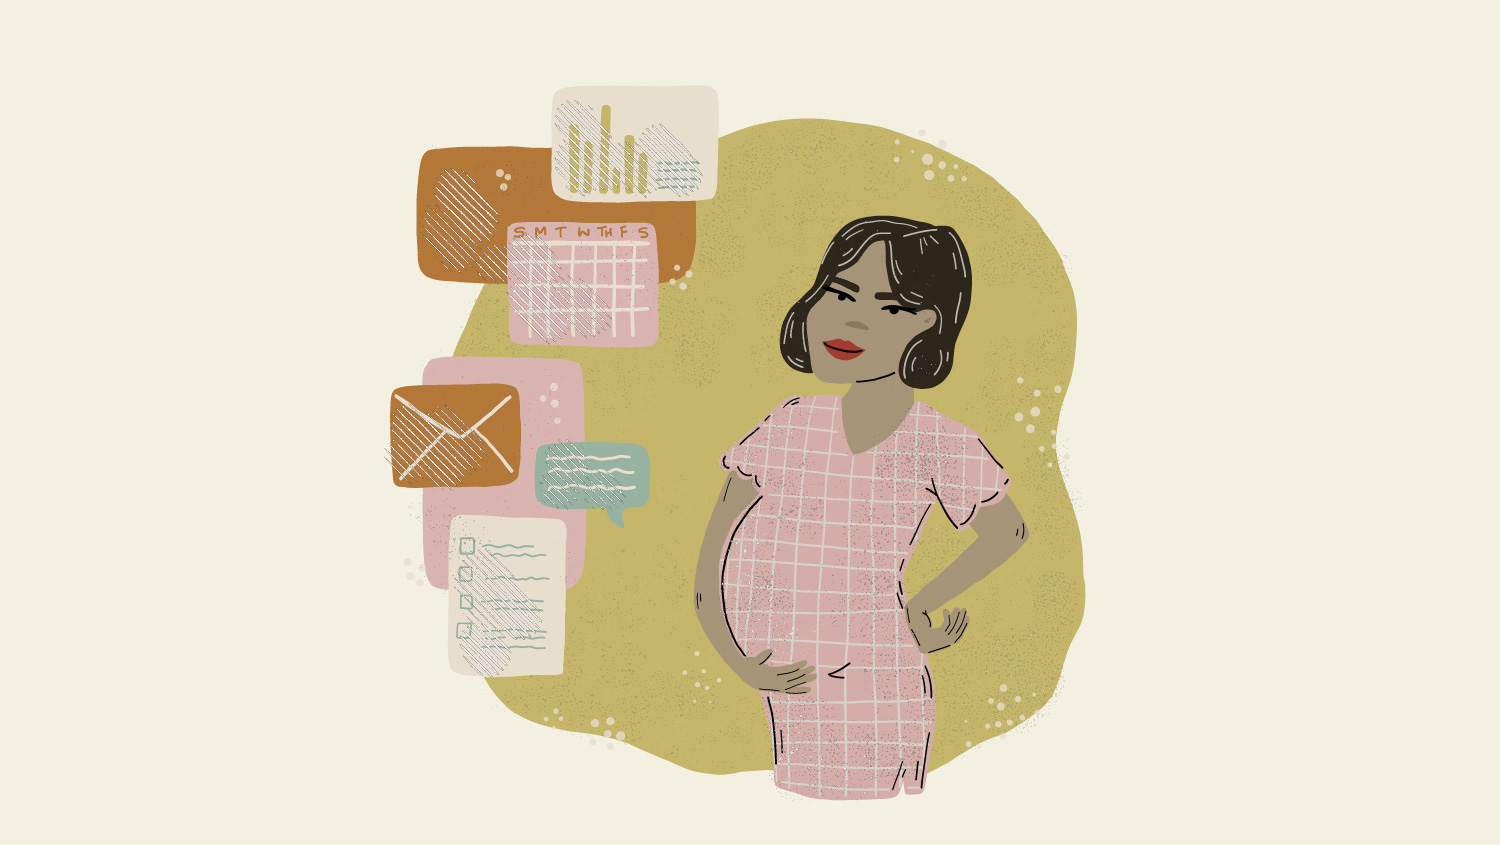 maternity leave images